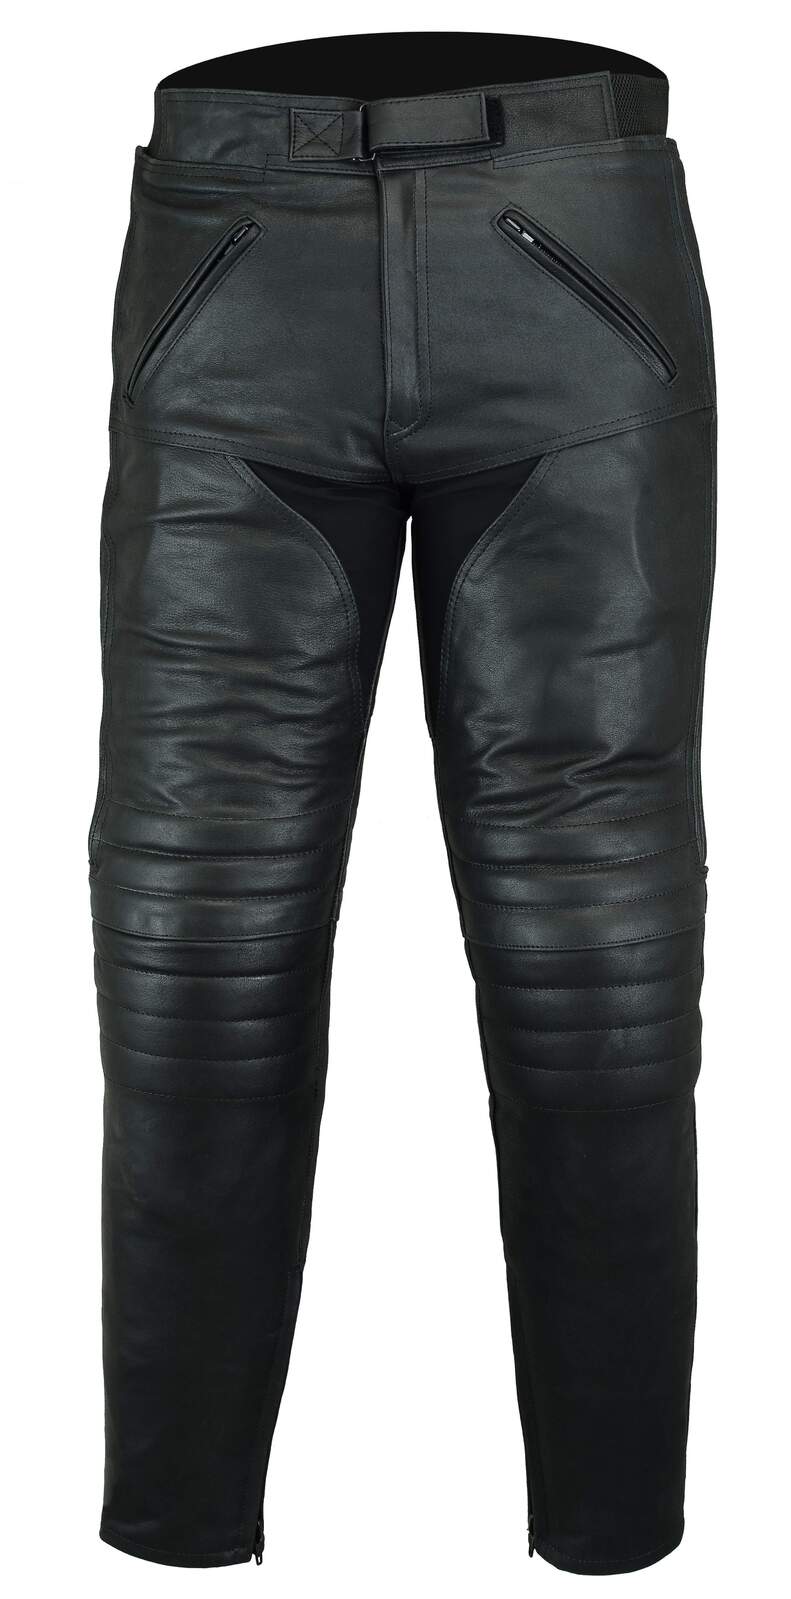 Motorcycle Pants With Armor / Womens Denim Motorcycle Pants with CE Armor and Kevlar